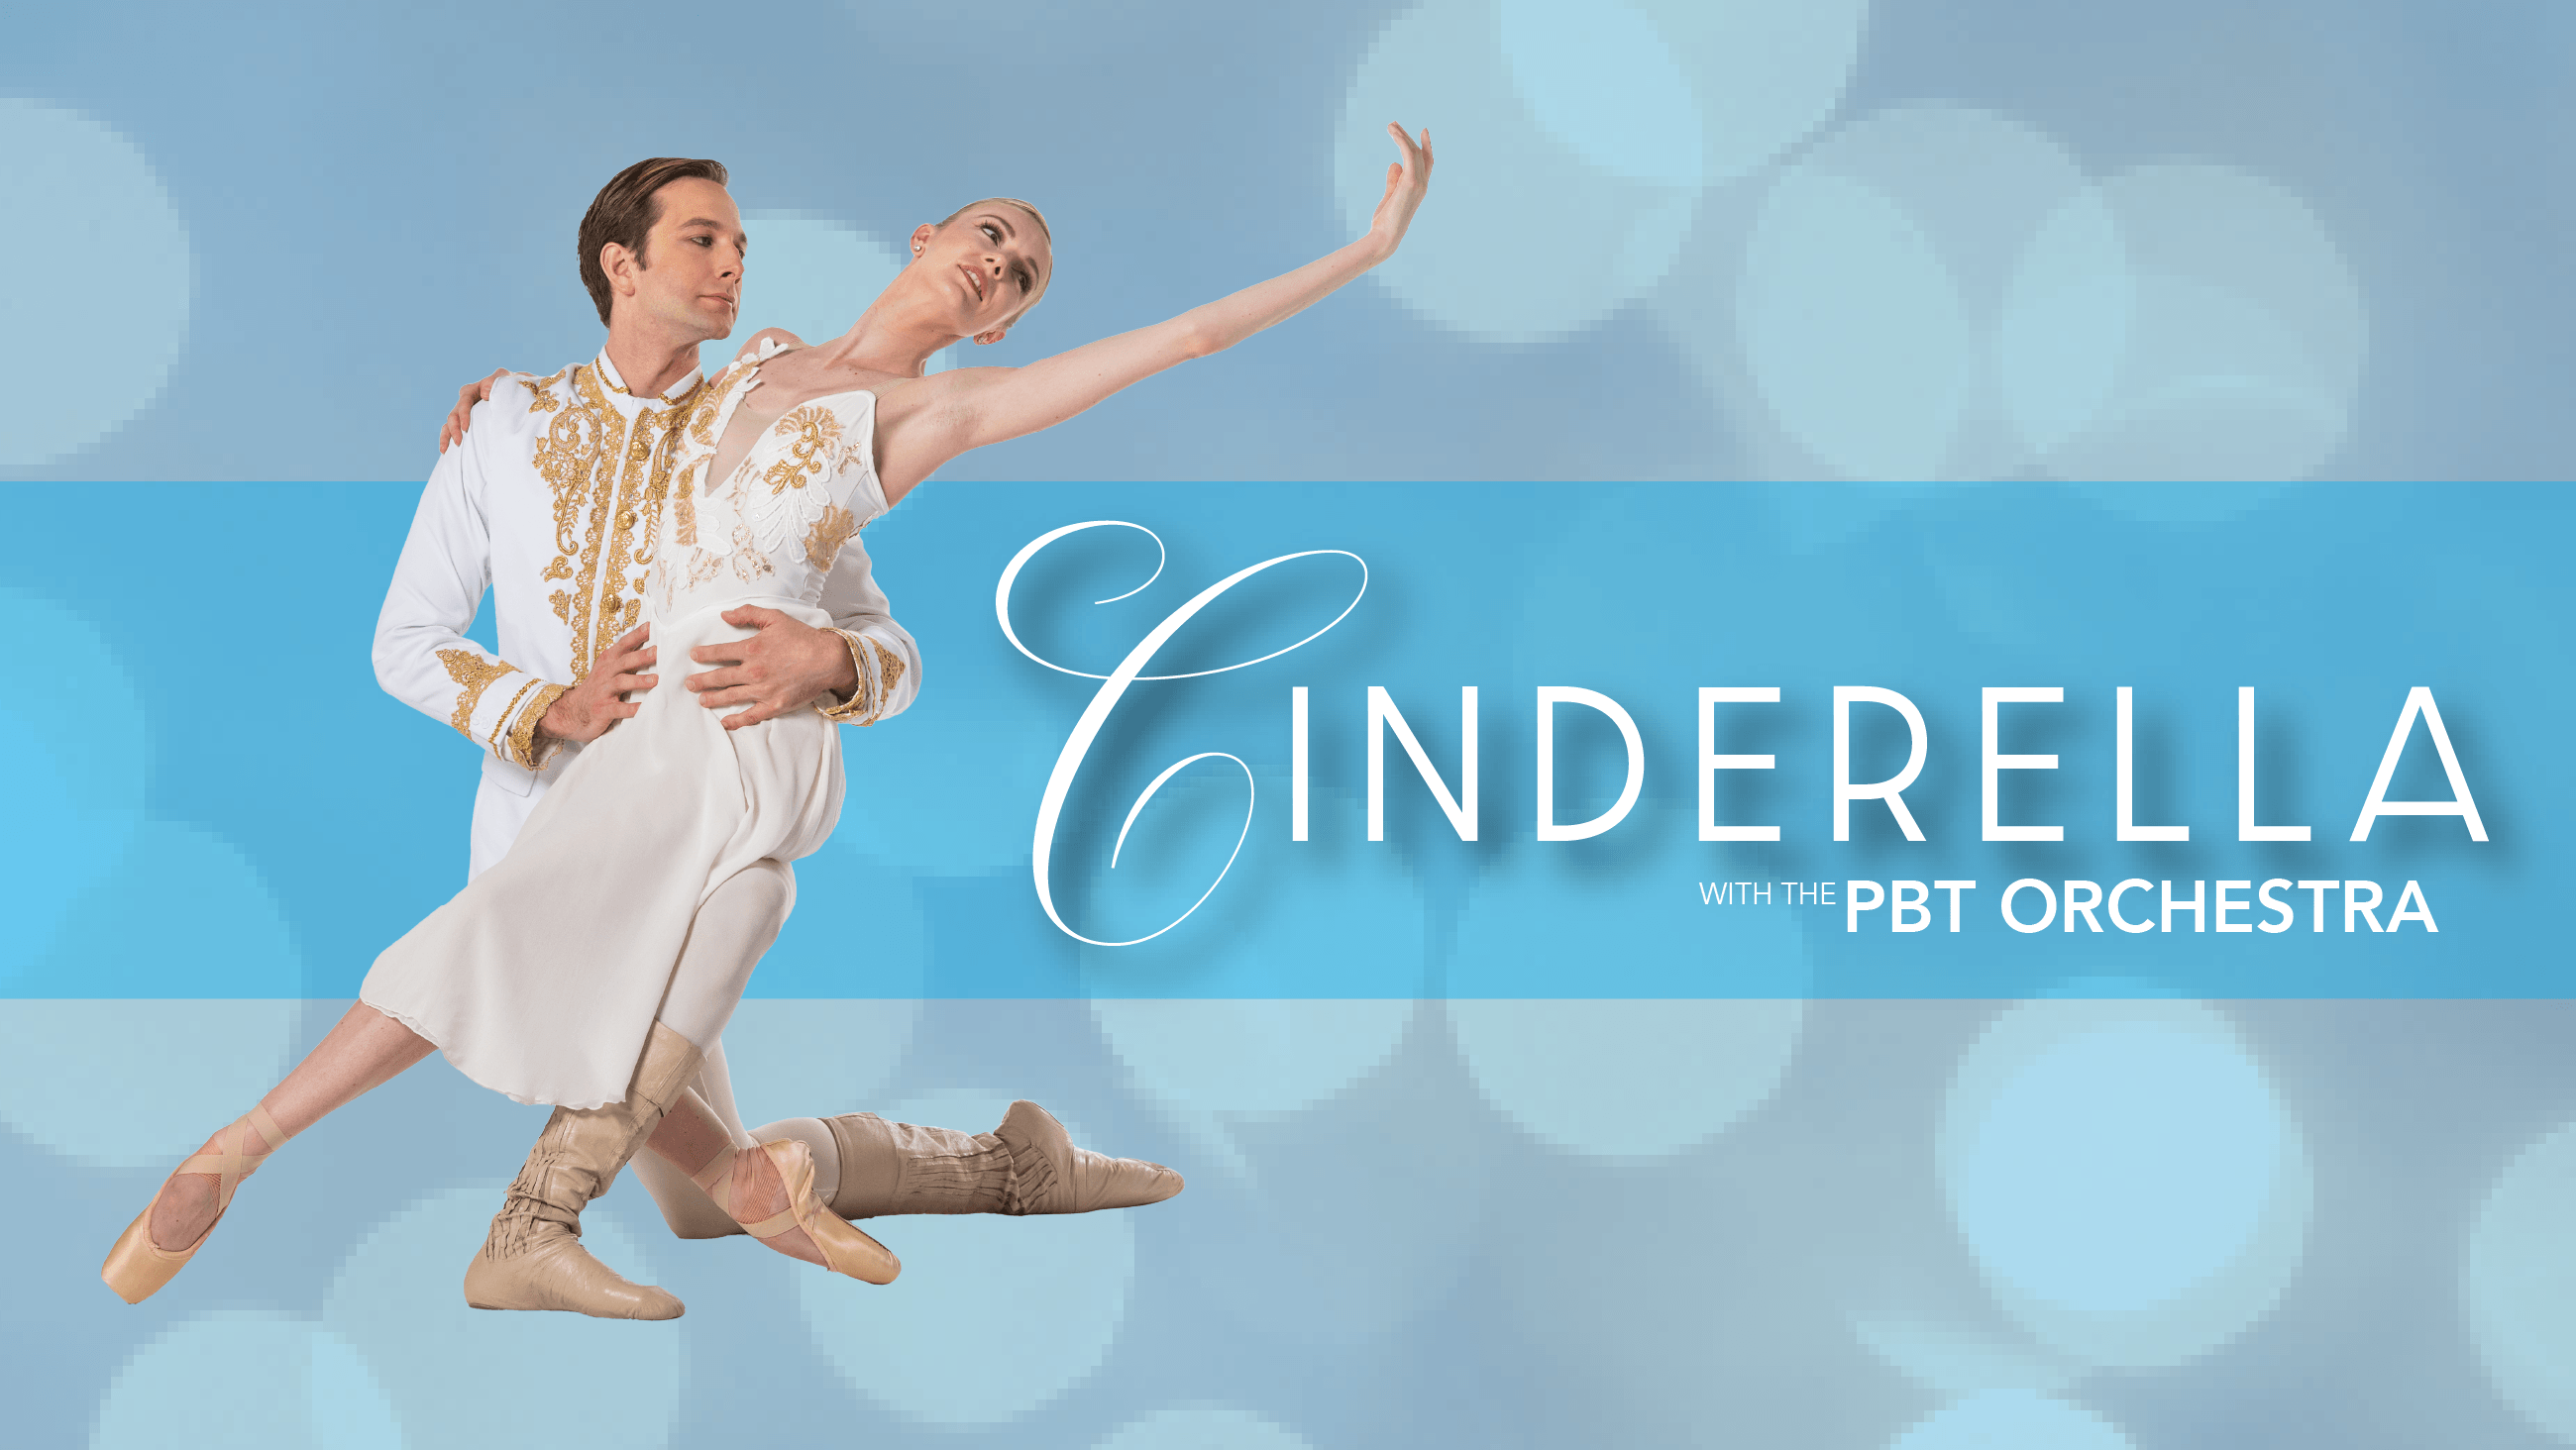 Cinderella with the PBT Orchestra